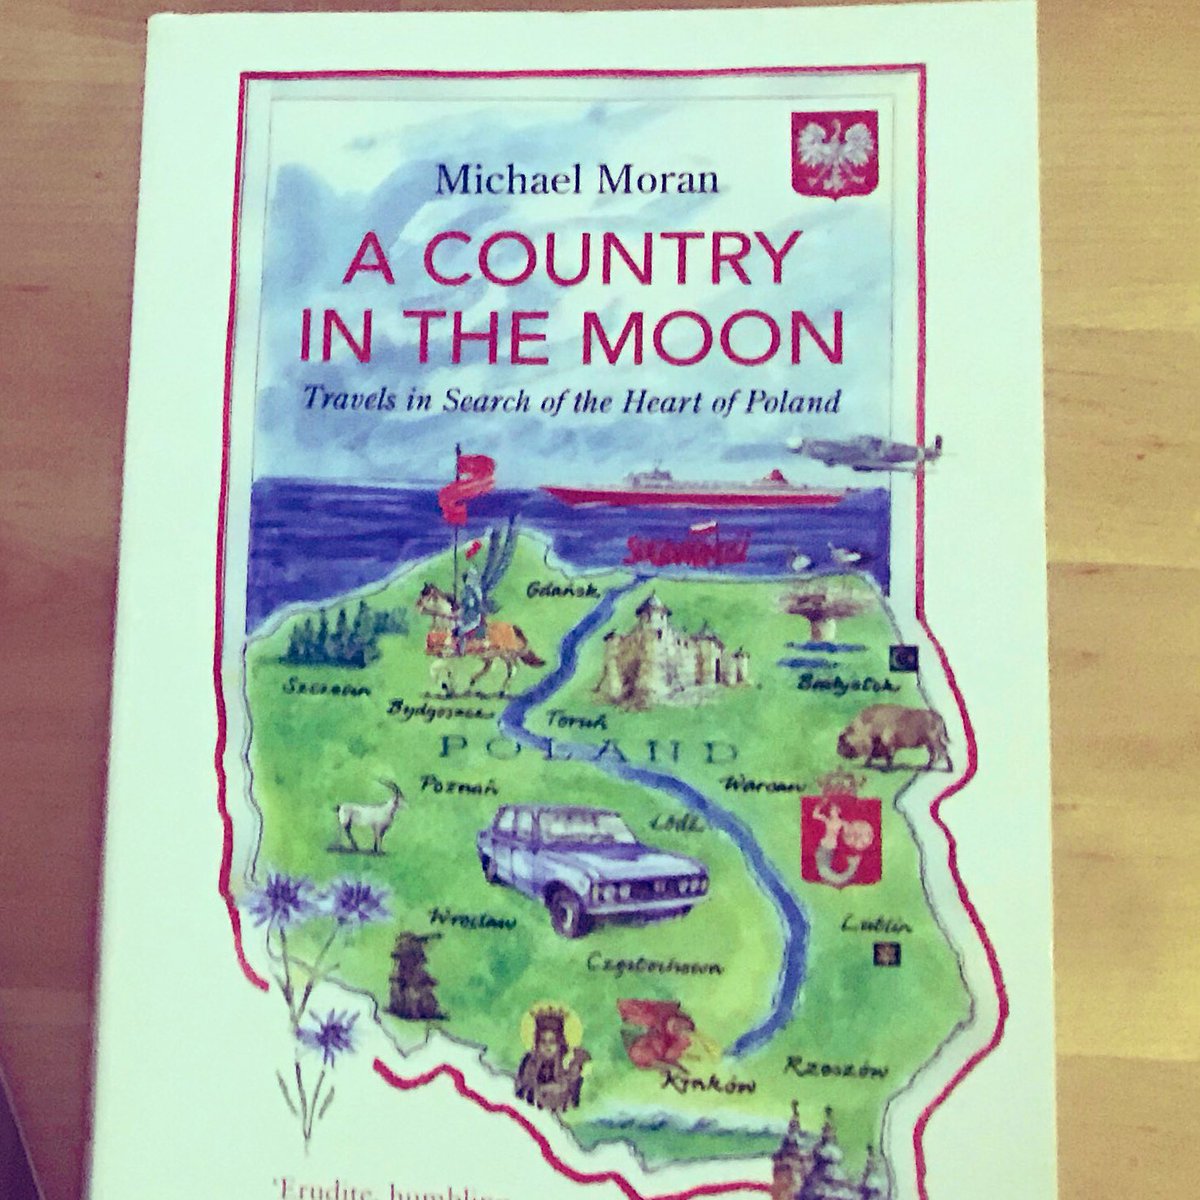 Book 8: A country in the moon - Michael Moran A reasonable history of Poland that taught me a few things but a little outdated and the authors neutrality was questionable.